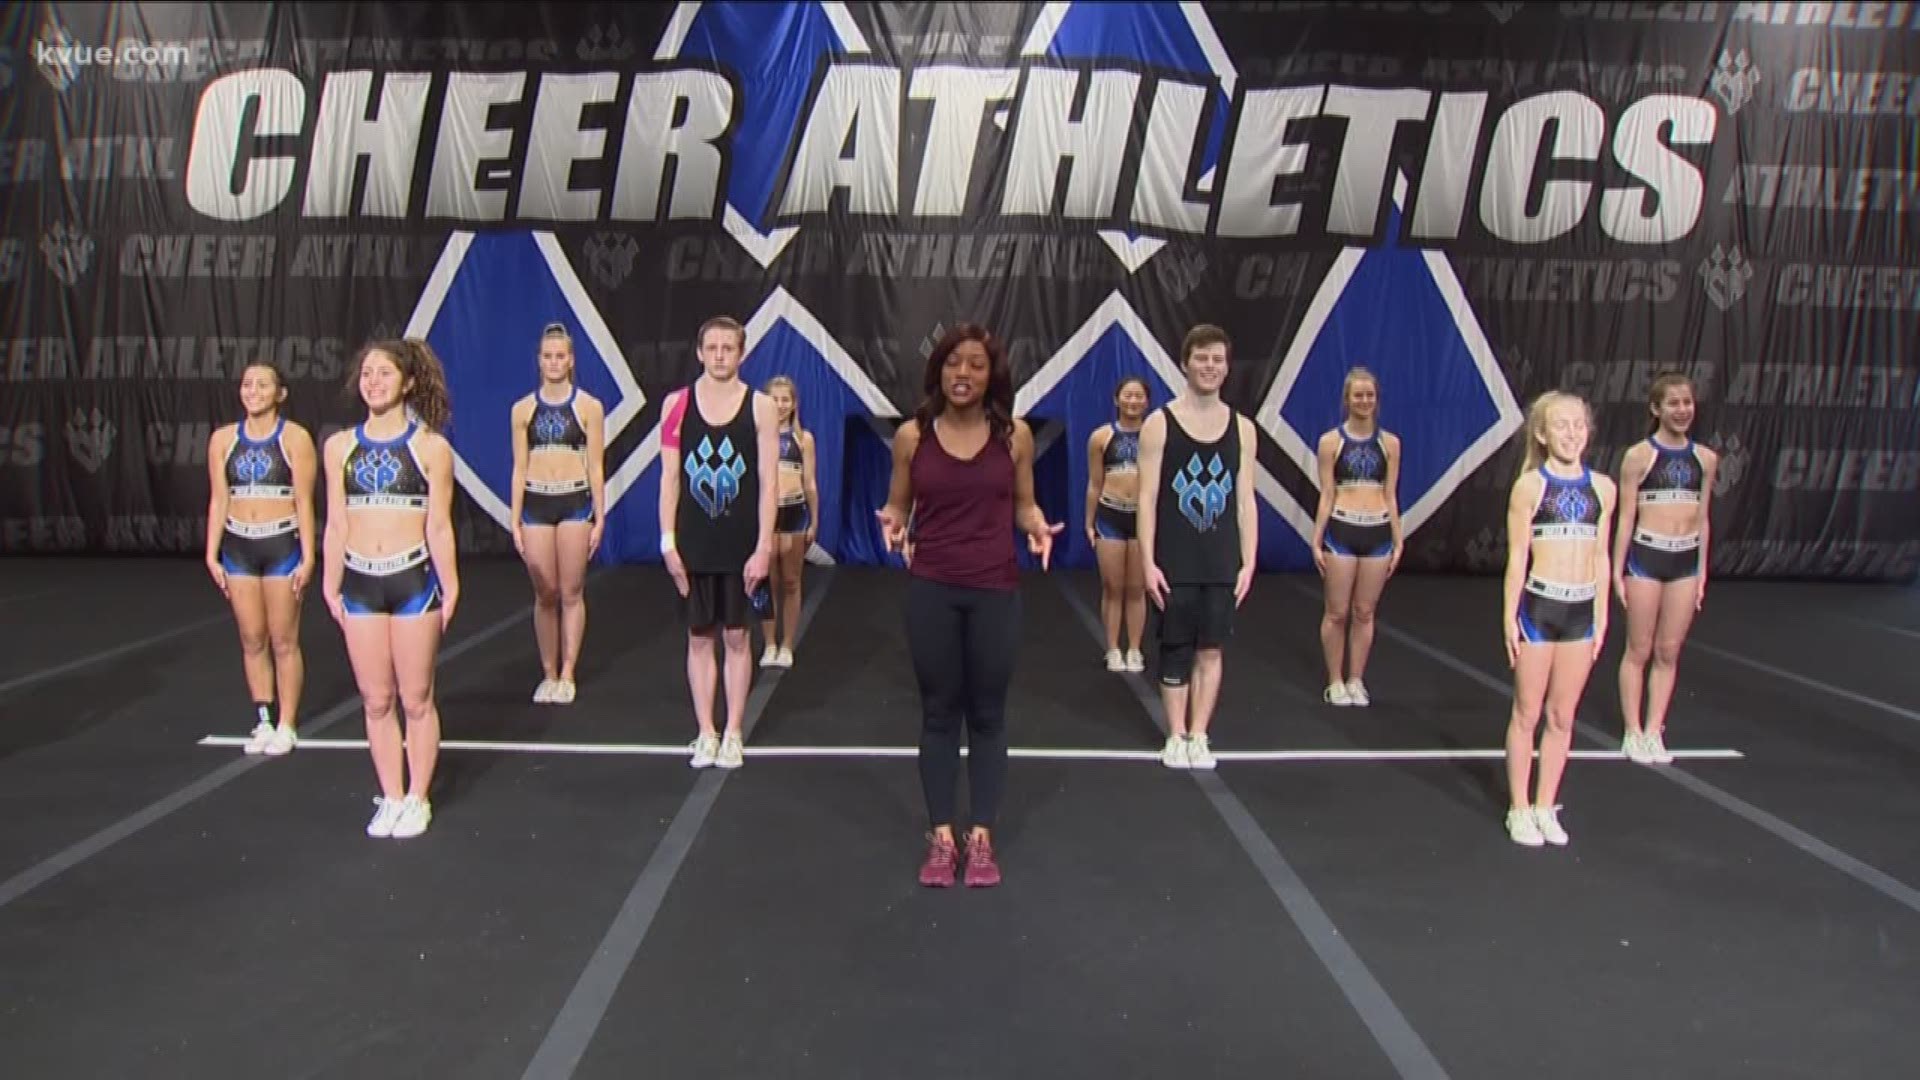 KVUE's Daranesha Herron spoke with a cheer team in Austin about how Netflix's "Cheer" has brought attention to the sport.